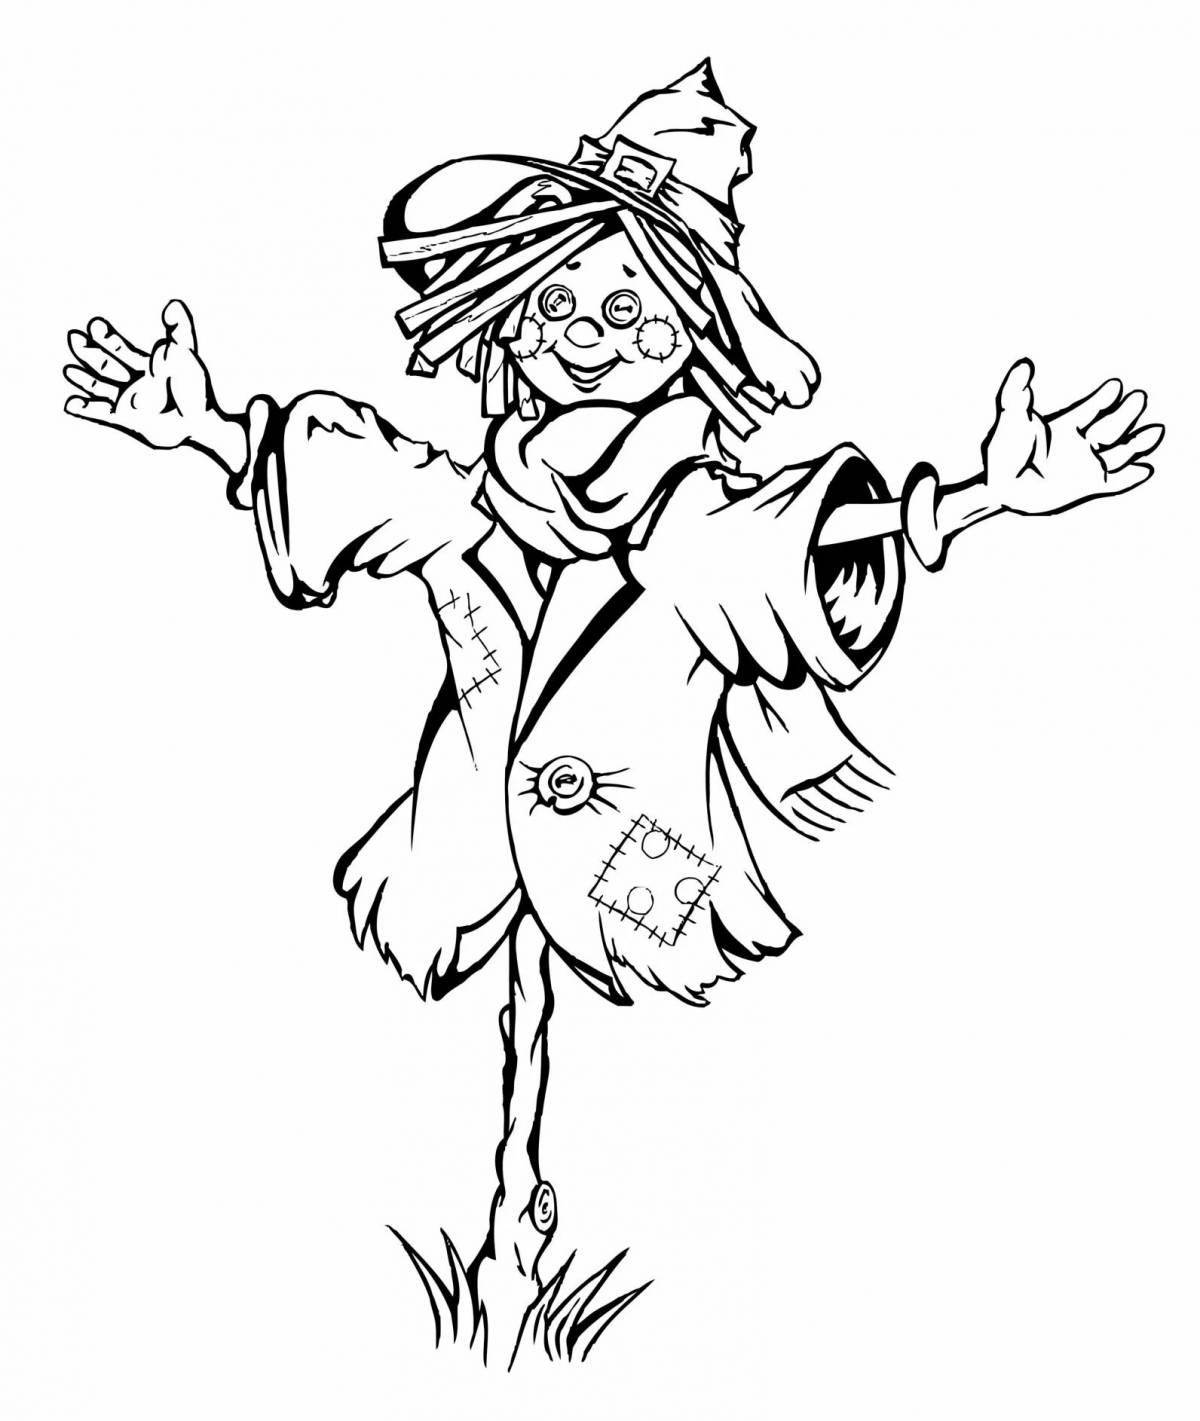 Colourful scarecrow coloring page